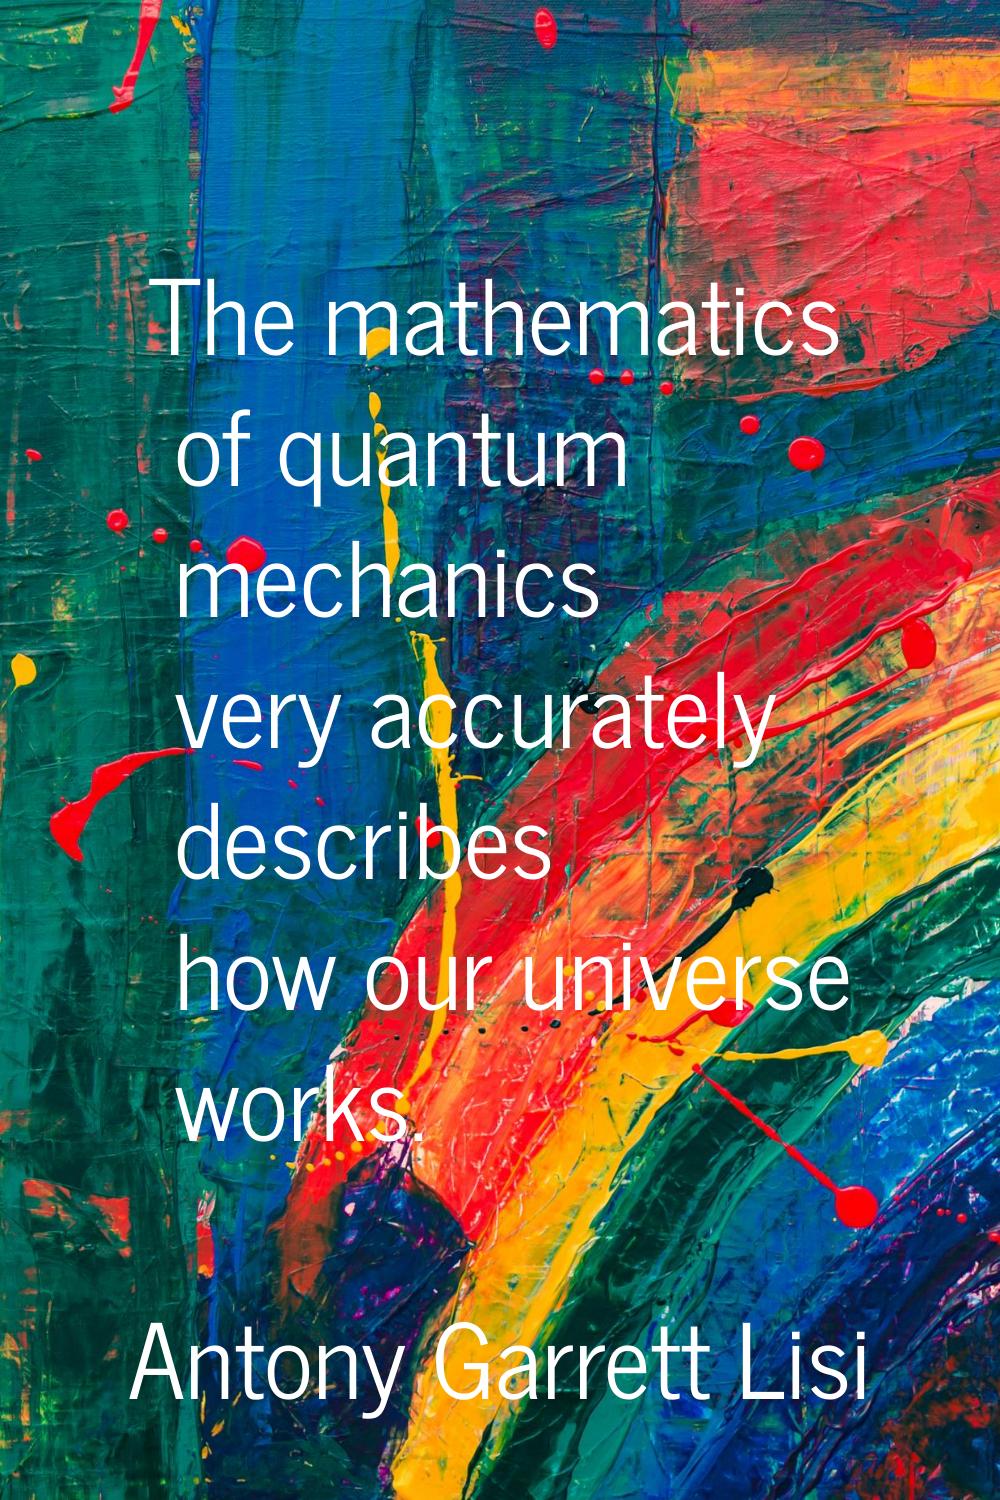 The mathematics of quantum mechanics very accurately describes how our universe works.